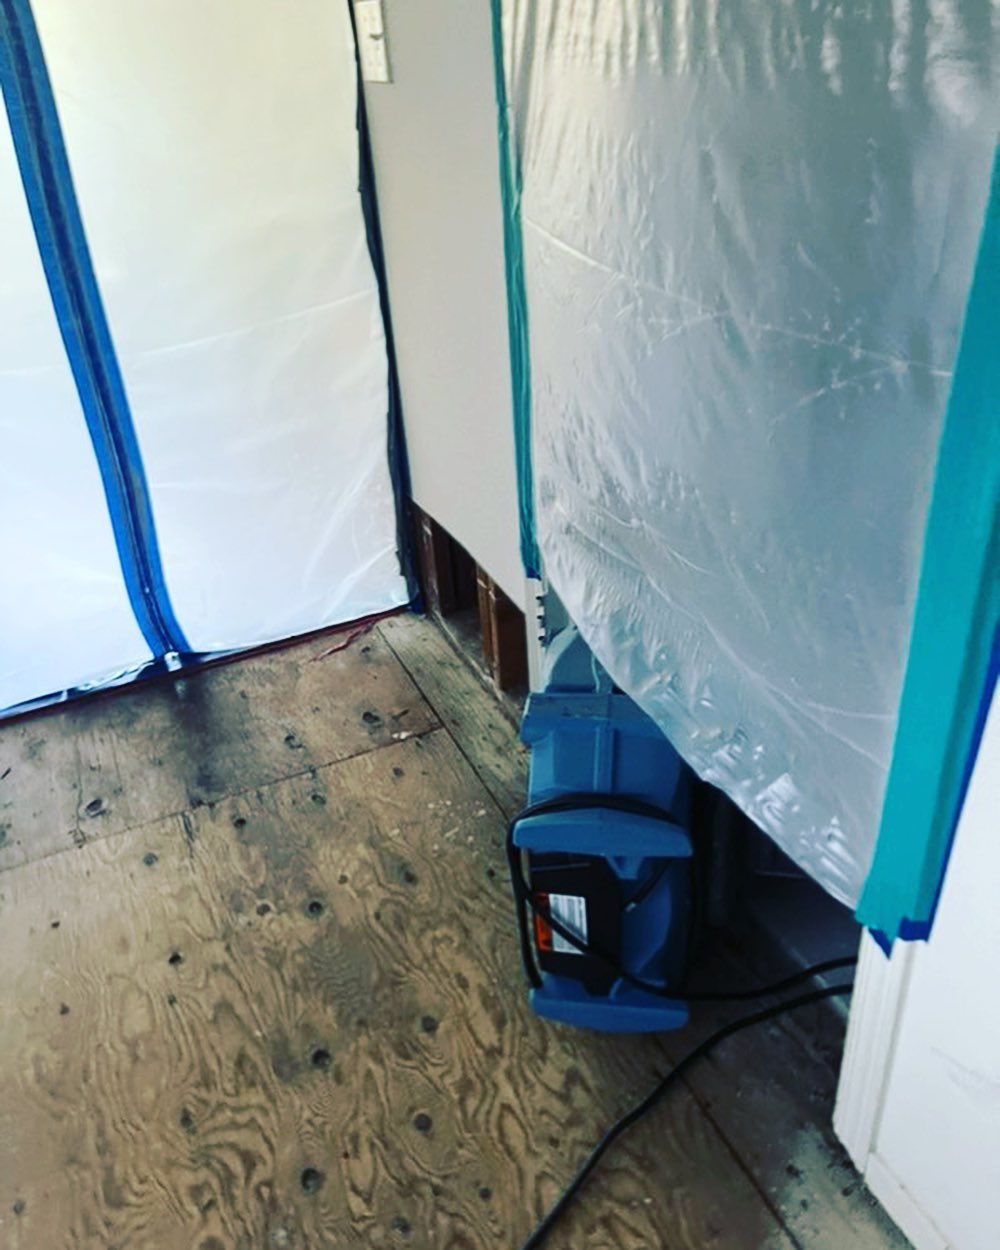 A room undergoing renovation with protective plastic sheeting covering the walls and floor suggests active mold restoration. A small section of drywall has been removed, revealing exposed studs, and a piece of equipment is on the floor.